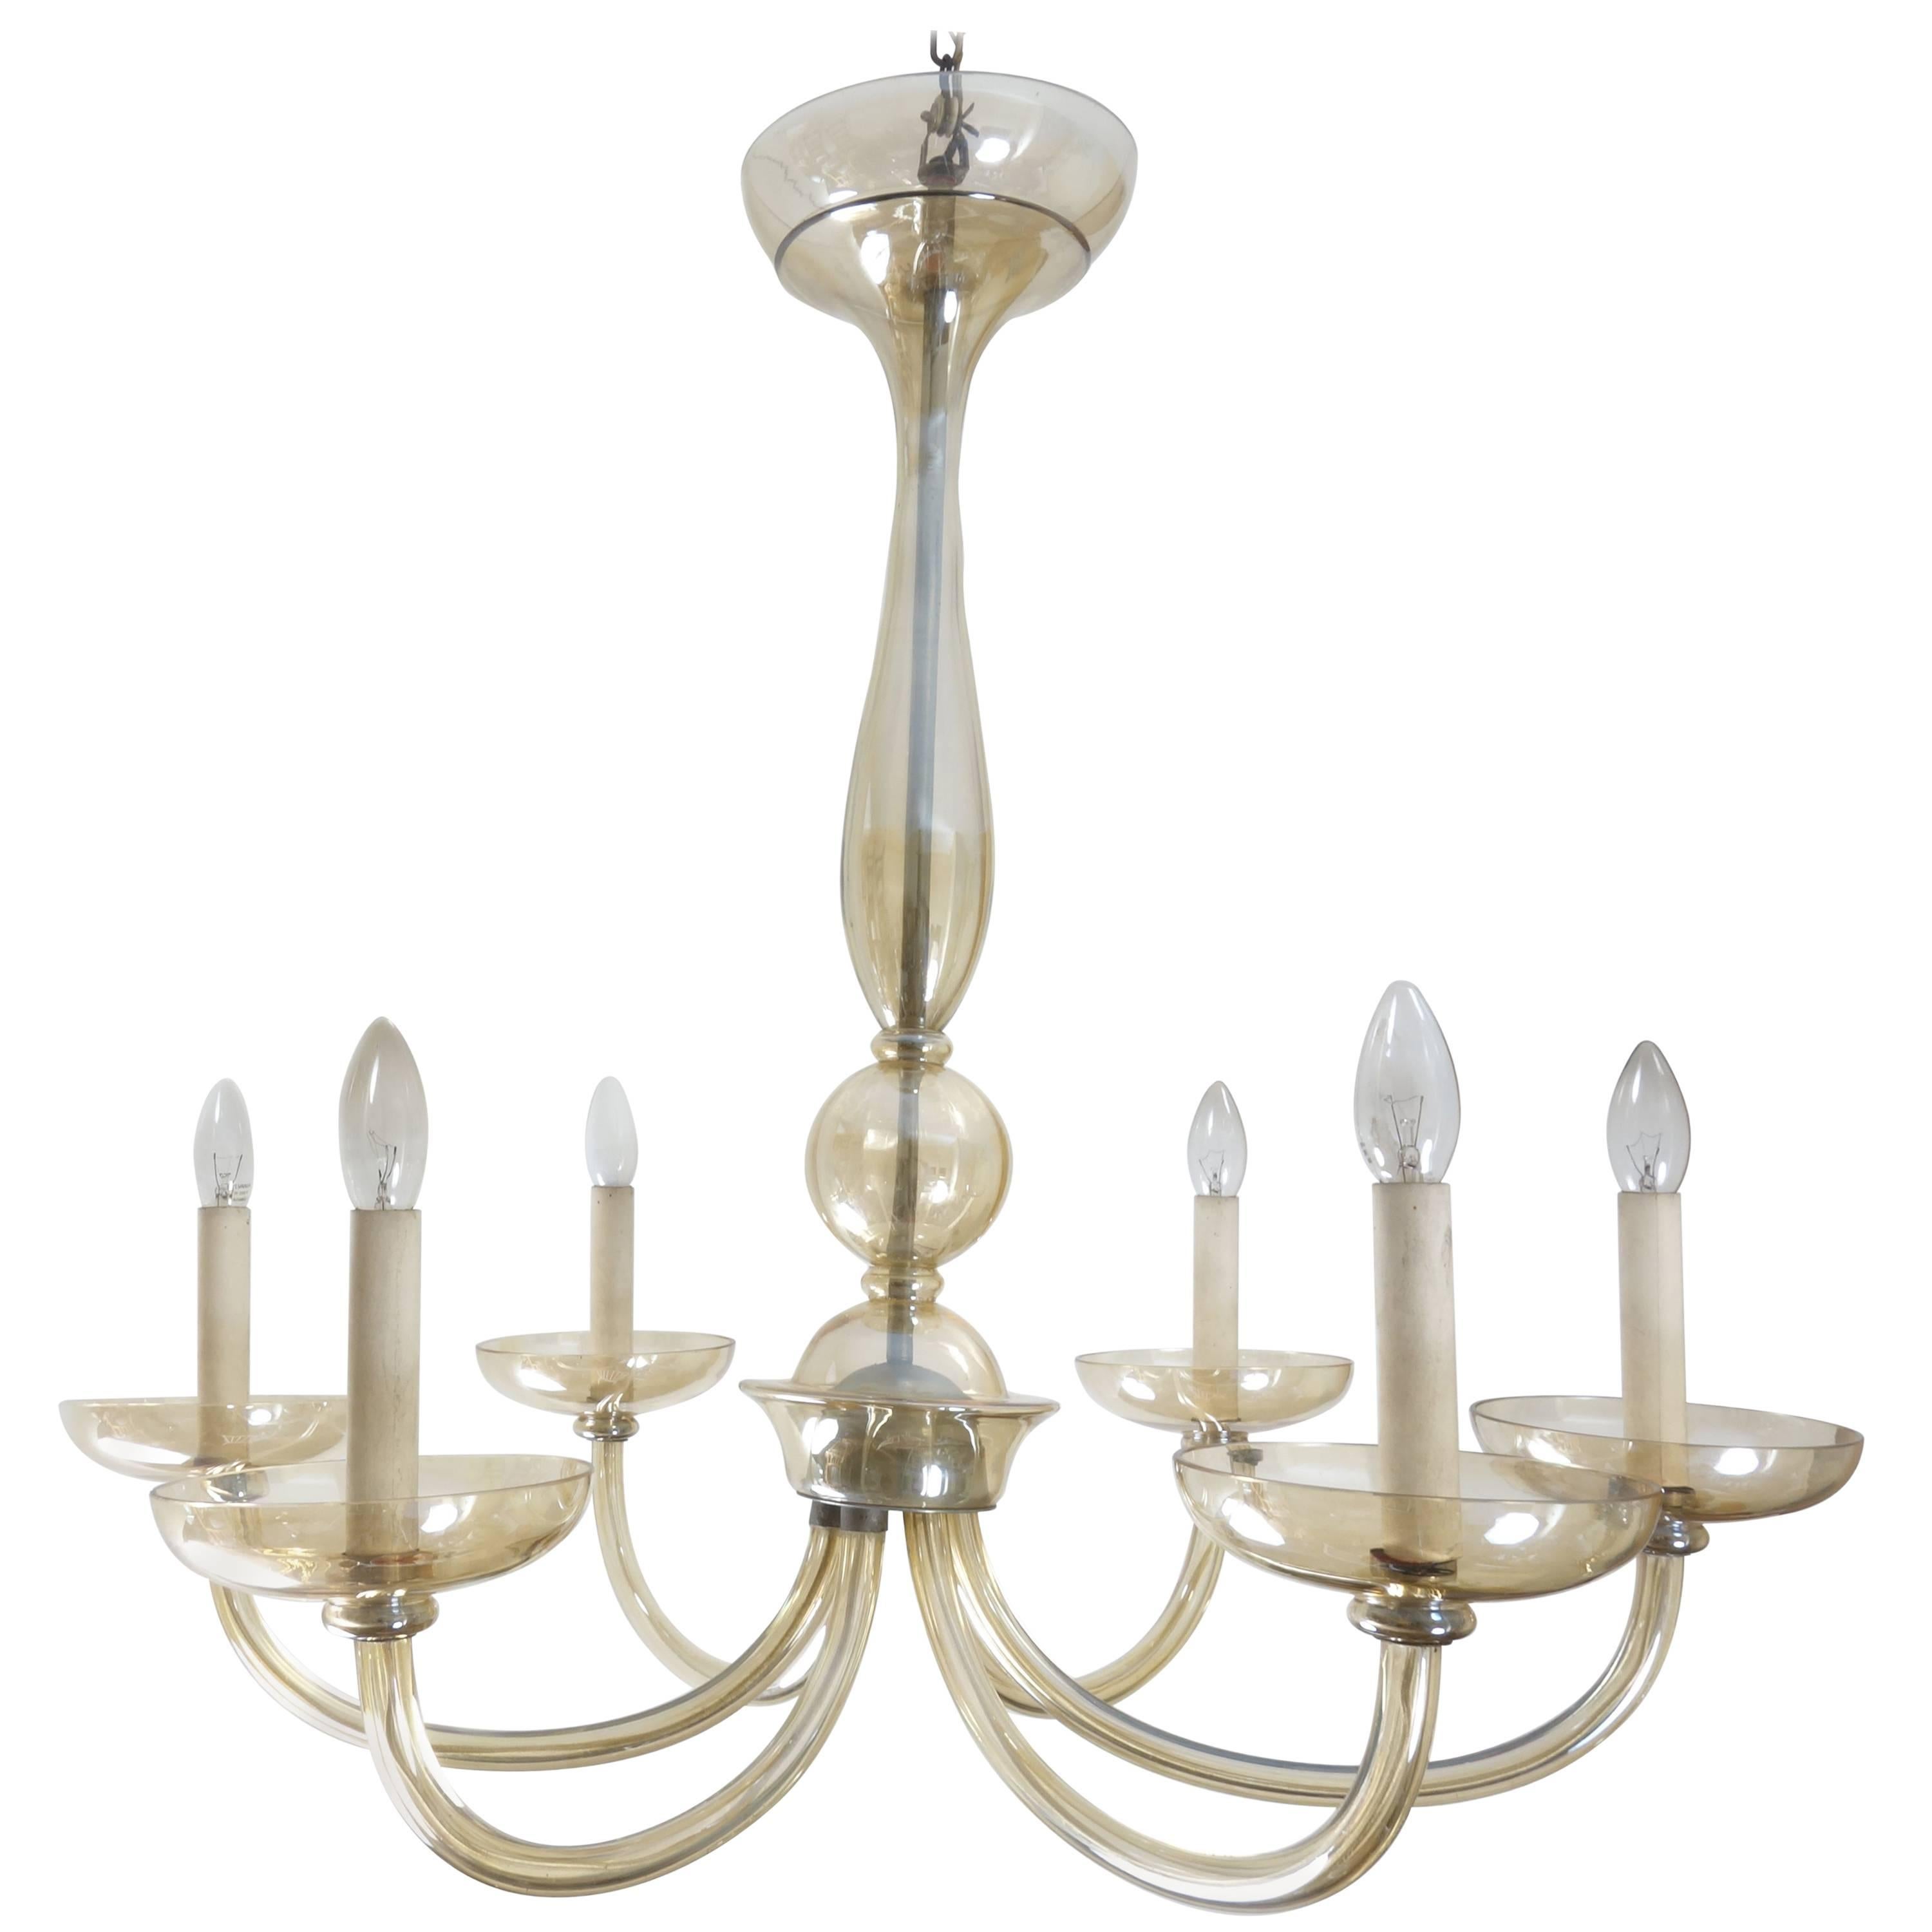 Large Six-Armed Glass Chandelier, Attributed to Lobmeyr, Translucent Amber Shade For Sale